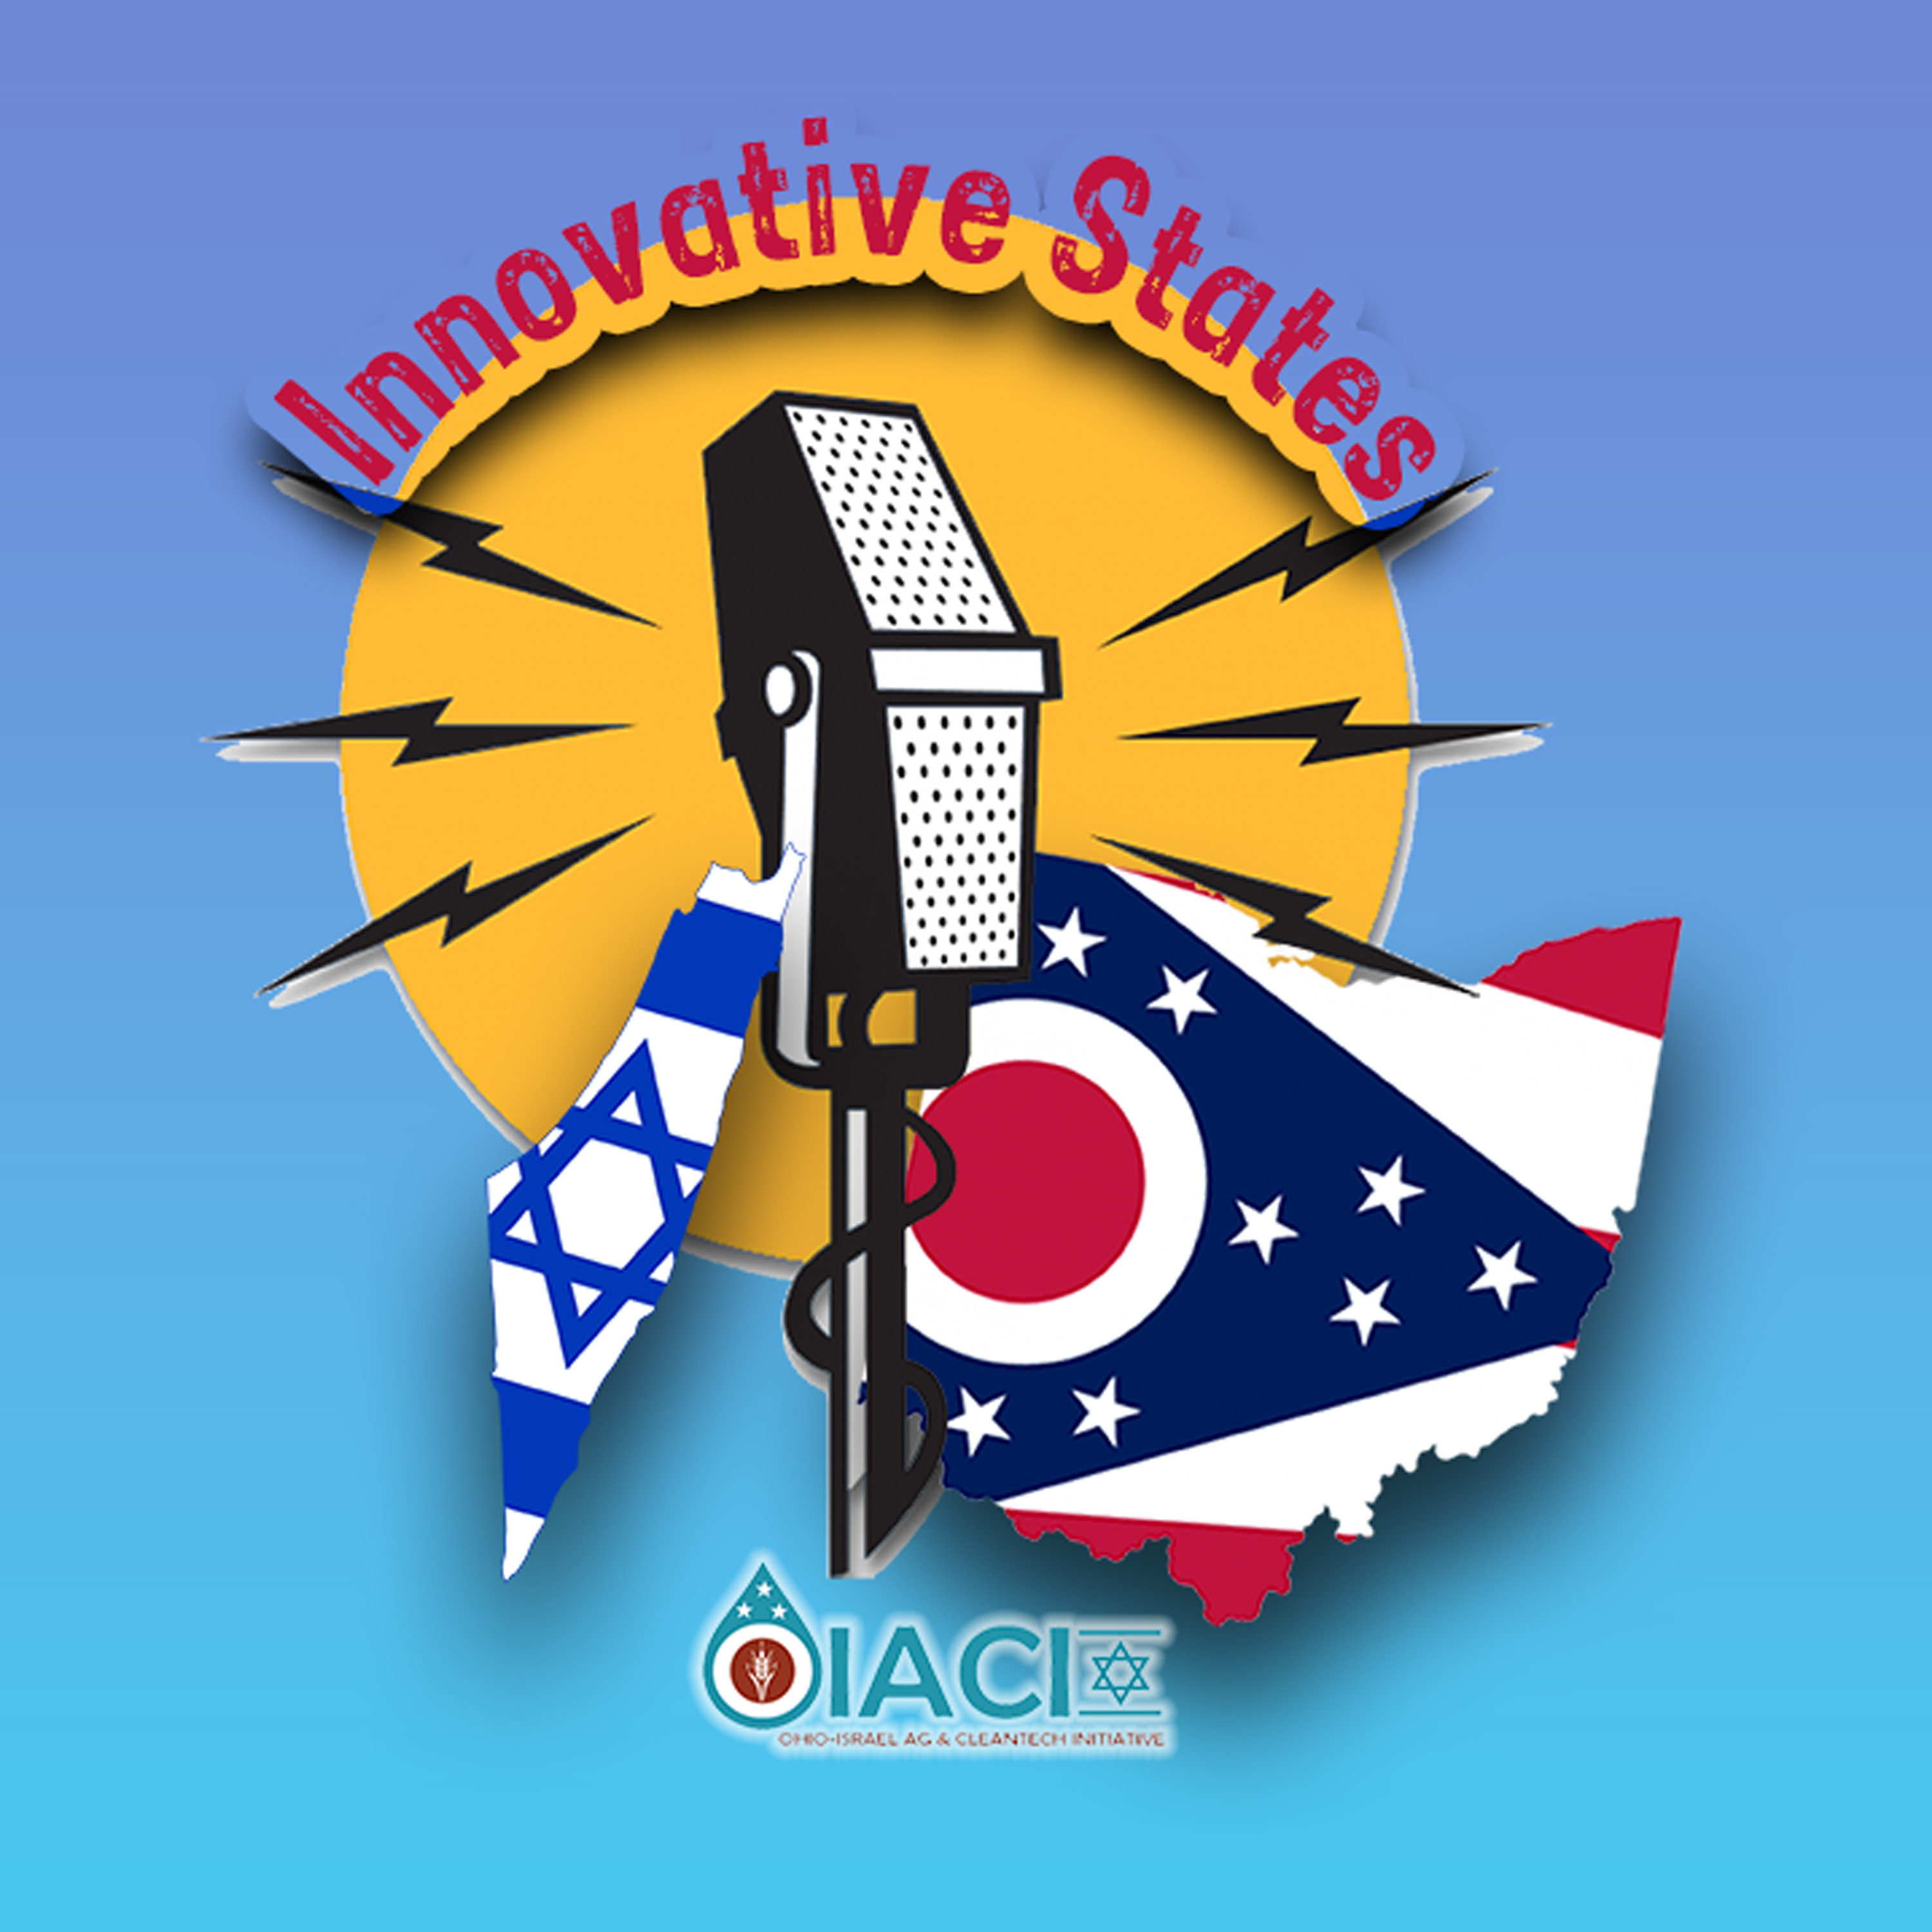 Innovative States: Ohio, Israel, and the impact of change